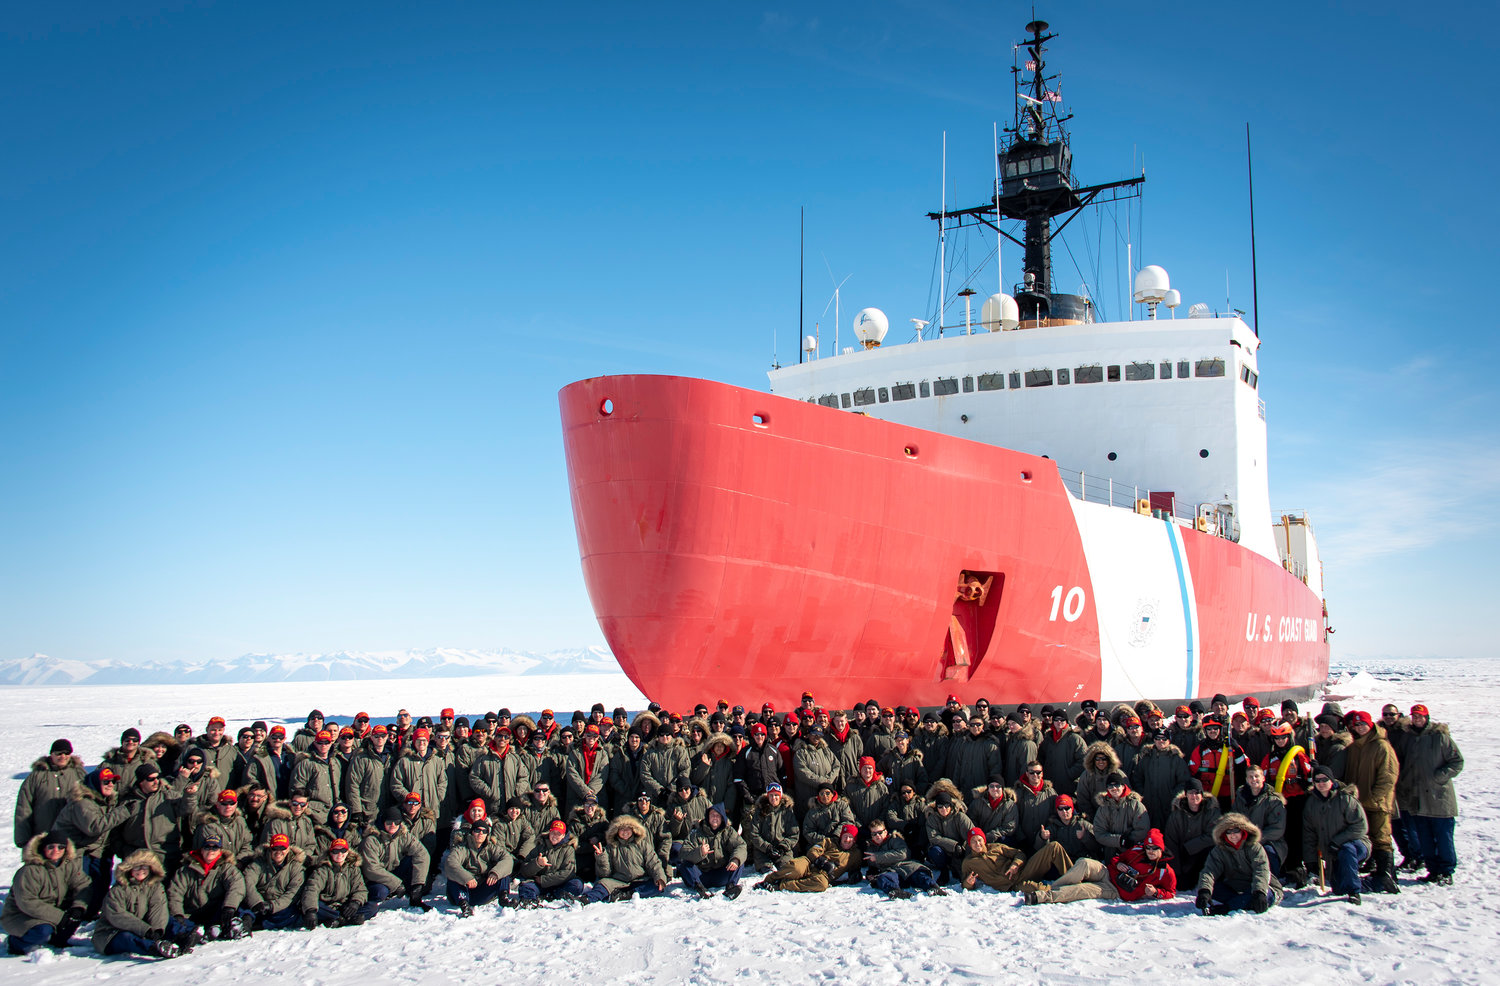 Frank Parenti with the rest of the crew of the Polar Star on the ice in Antarctica during a delivery to McMurdo Station.